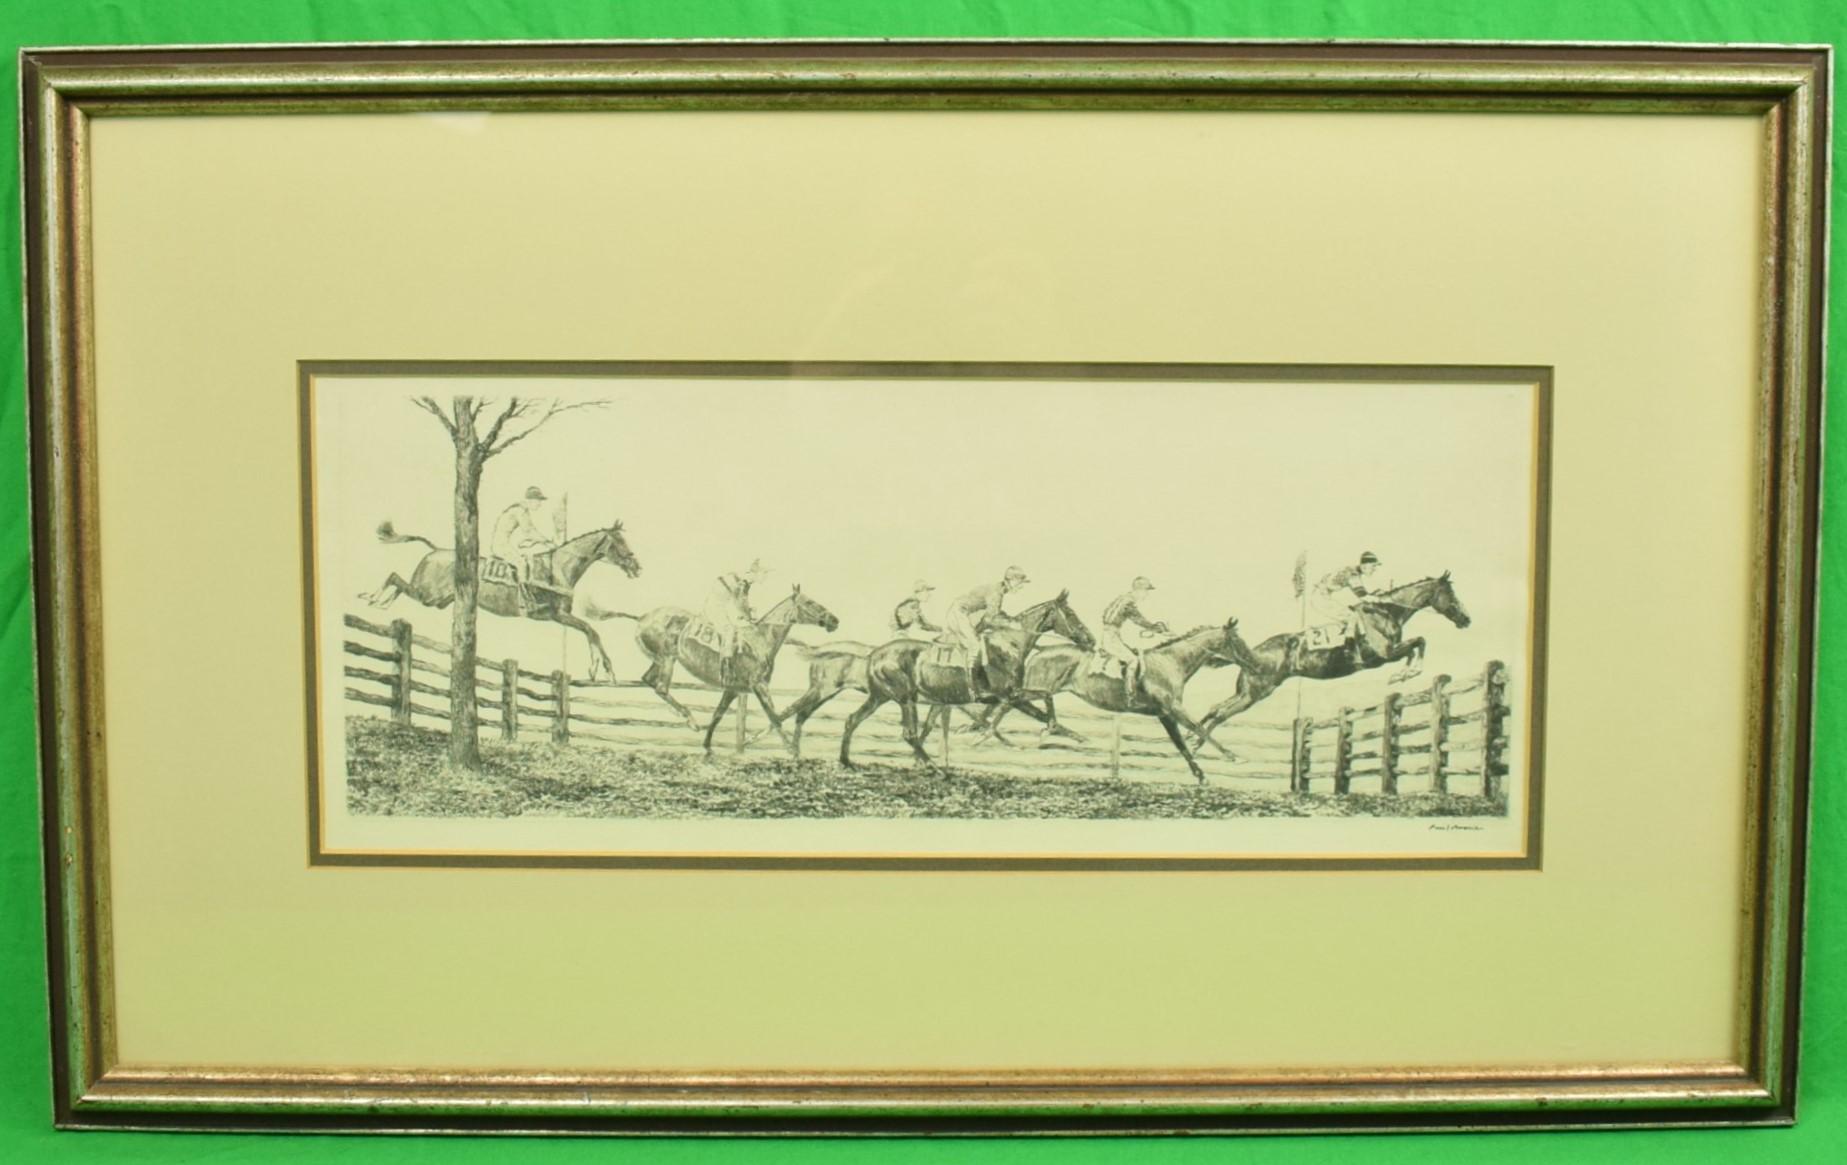 Paul Desmond Brown Figurative Art - "New Jersey Hunt Cup" circa 1930 Drypoint by Paul Brown